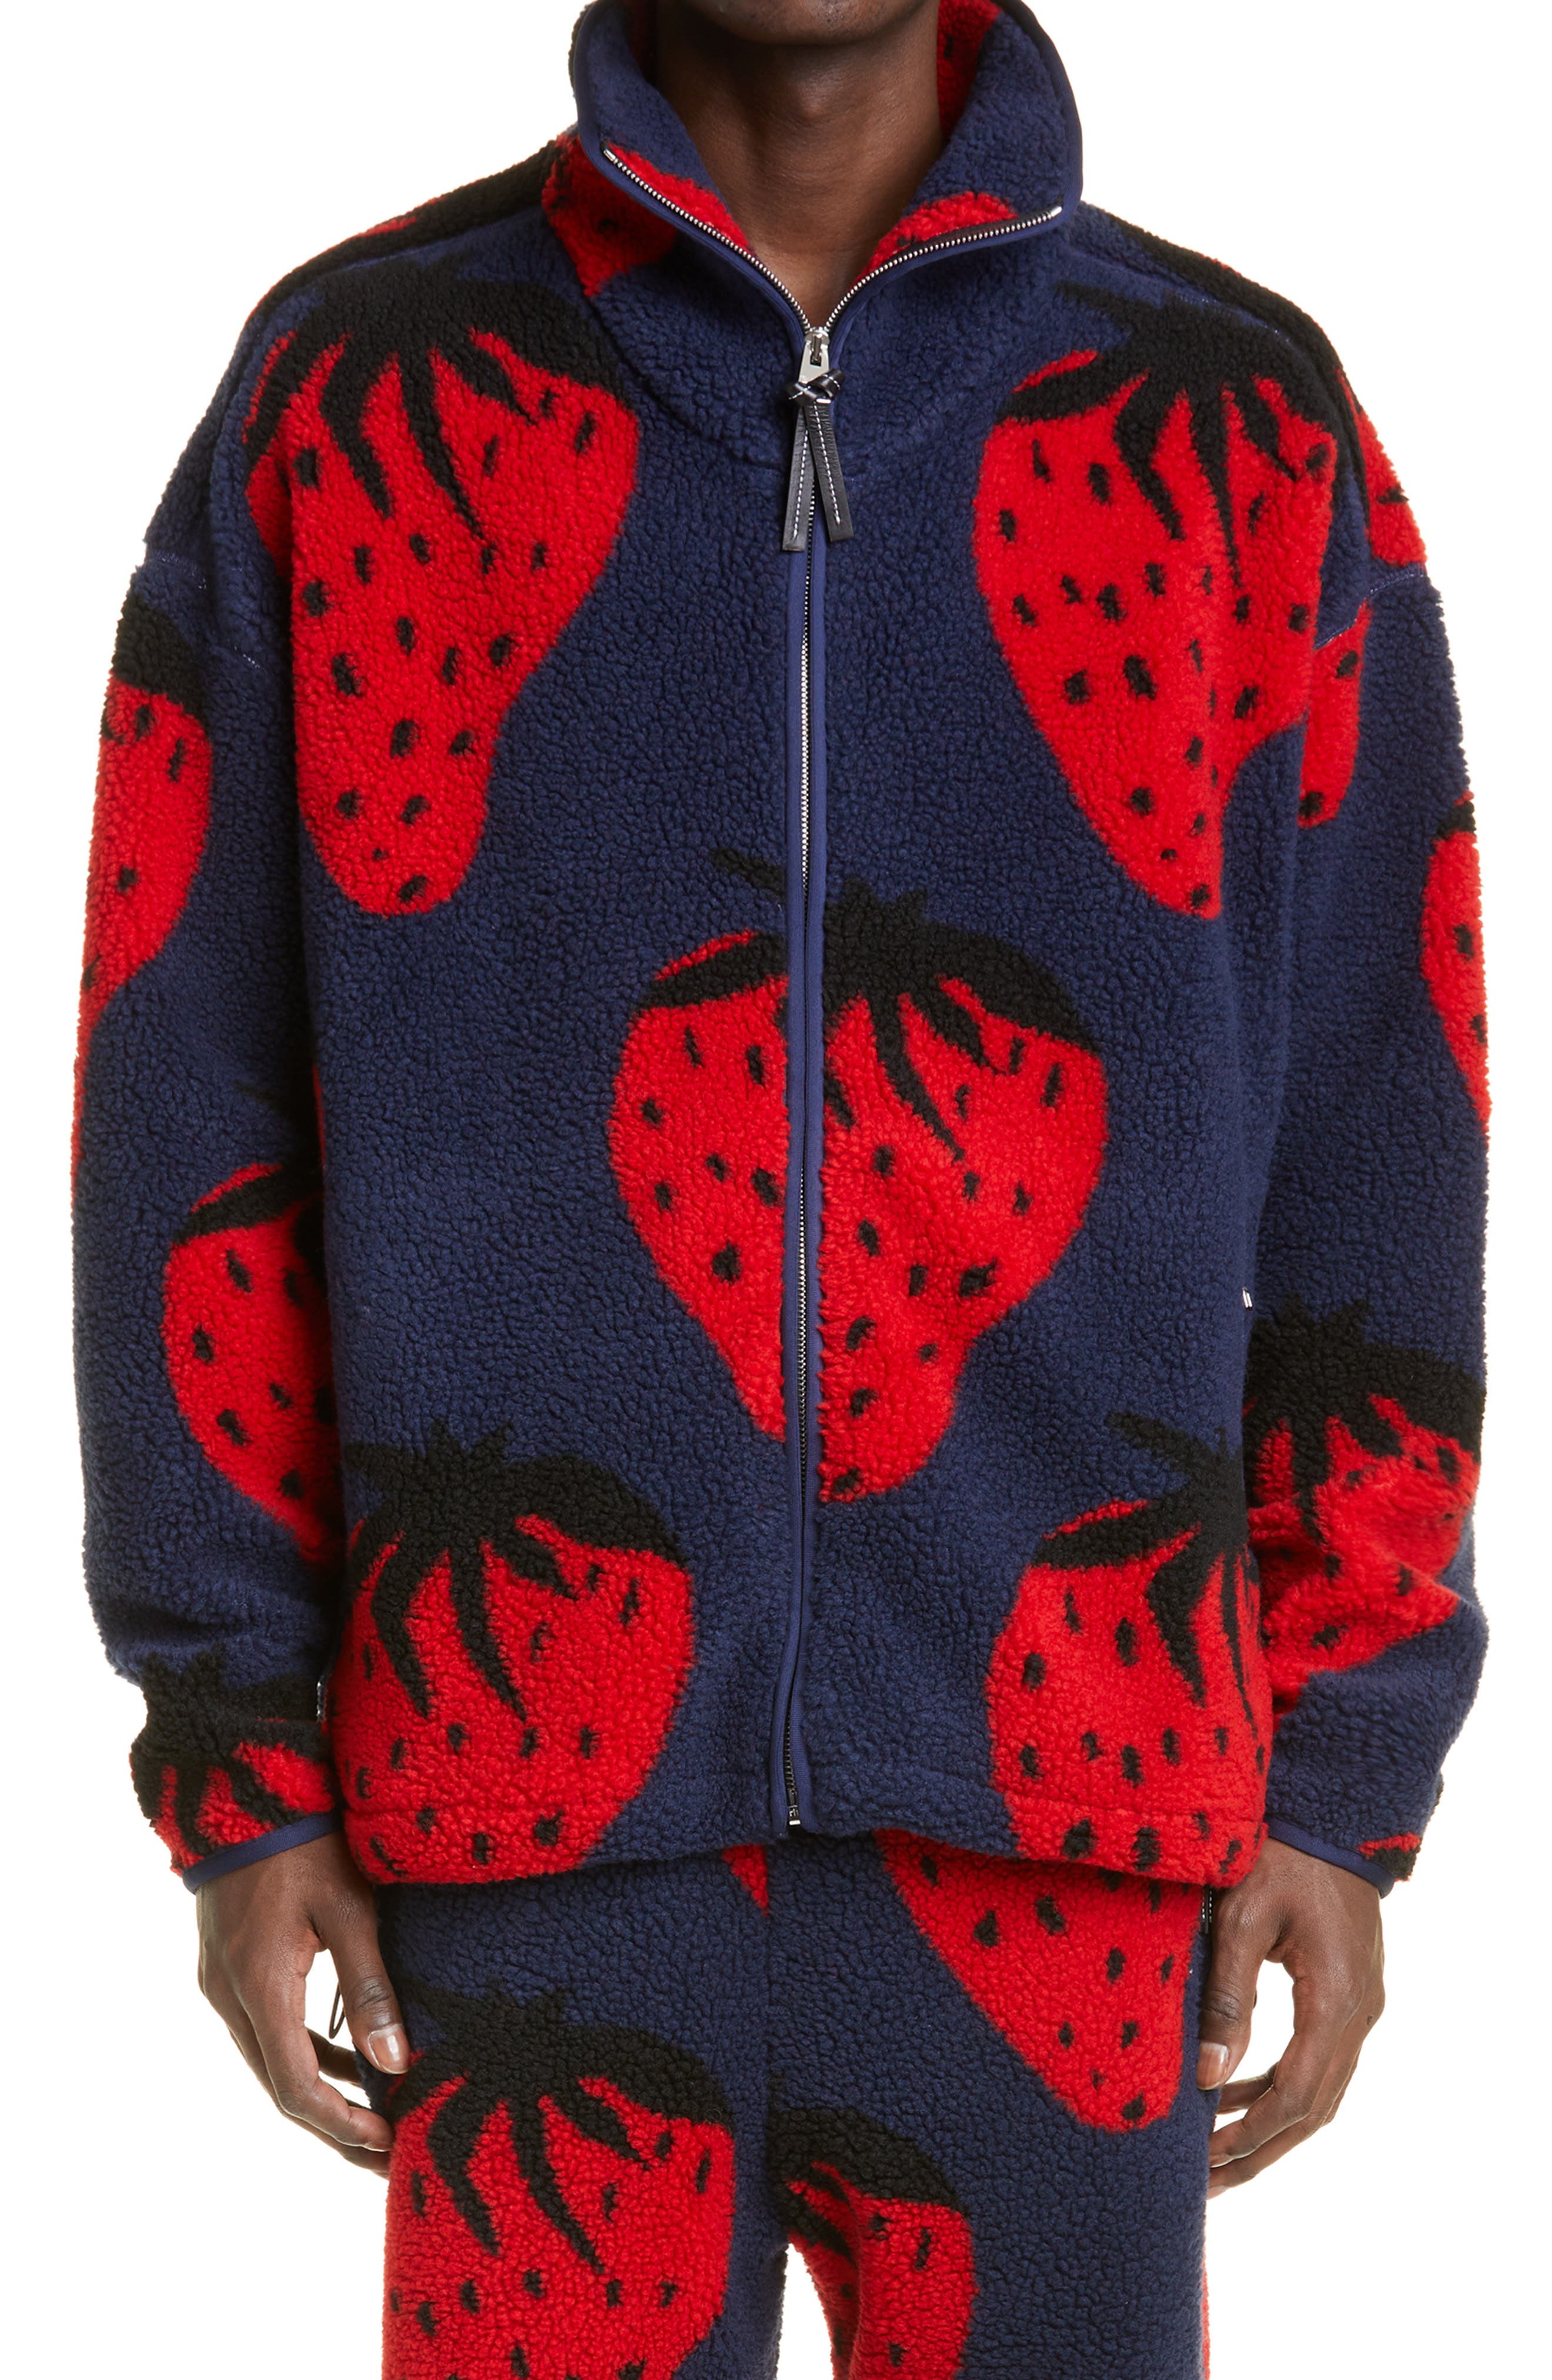 JW Anderson Strawberry Fleece Jacket in Navy/Red at Nordstrom, Size Large